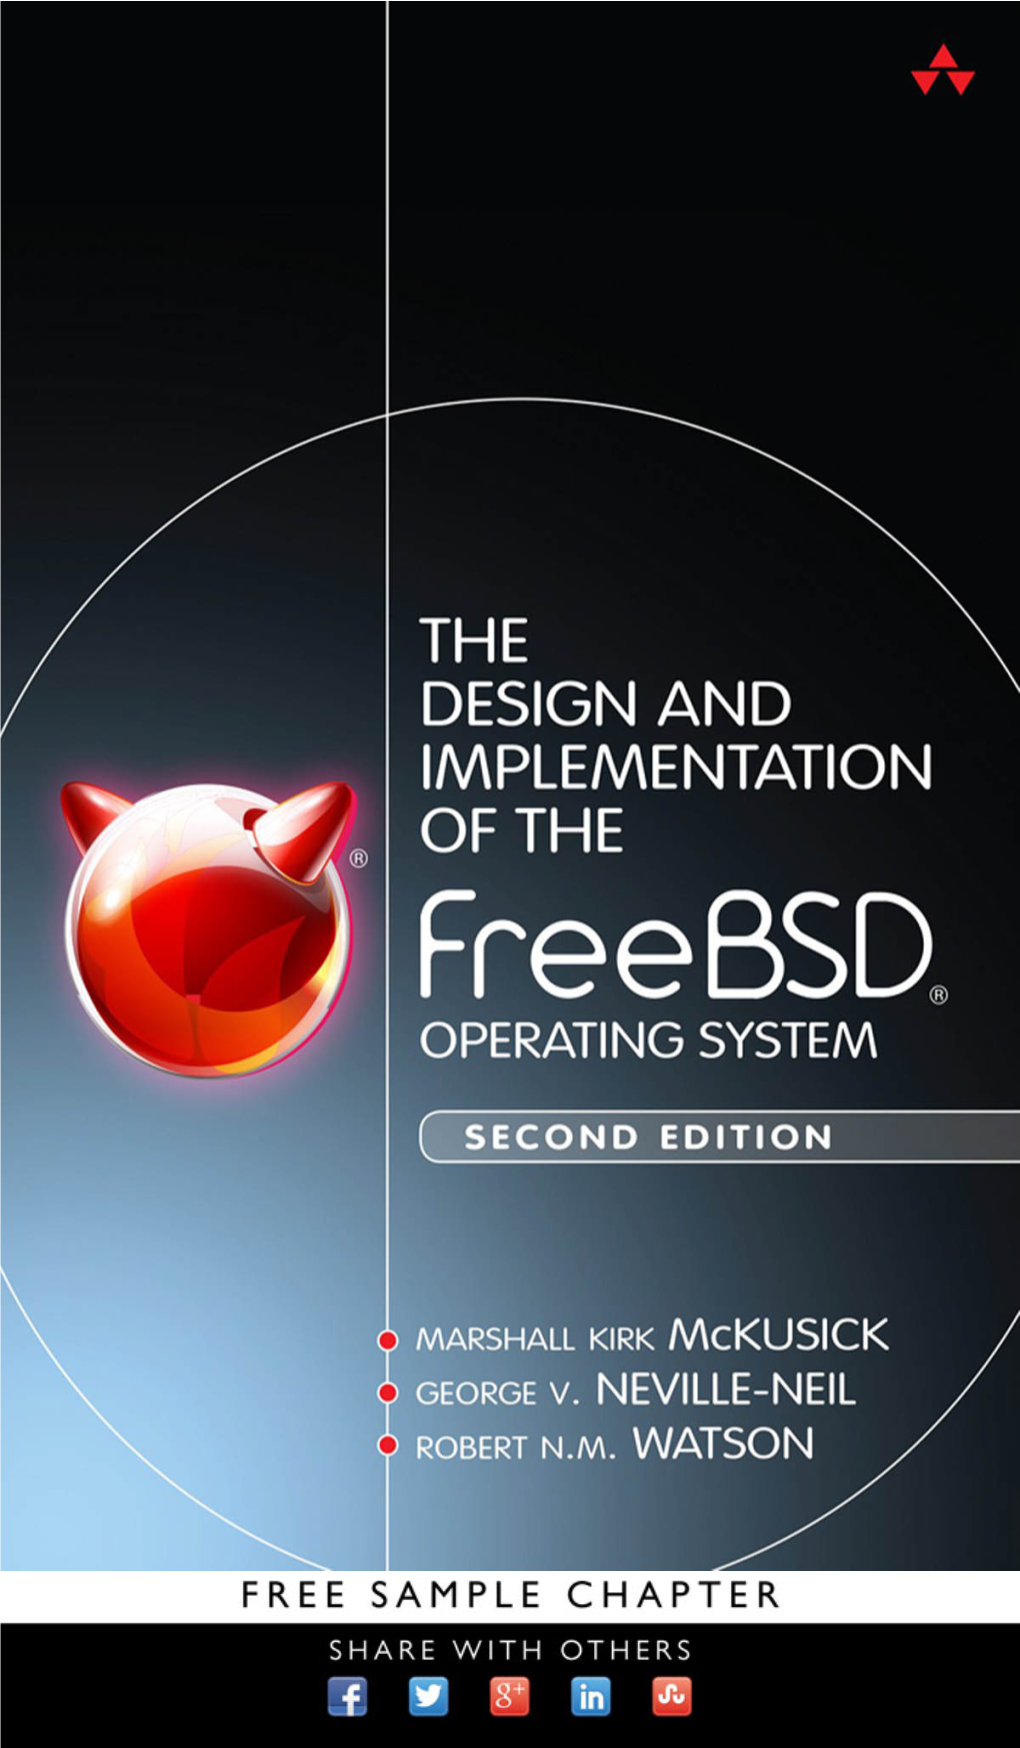 The Design and Implementation of the Freebsd® Operating System